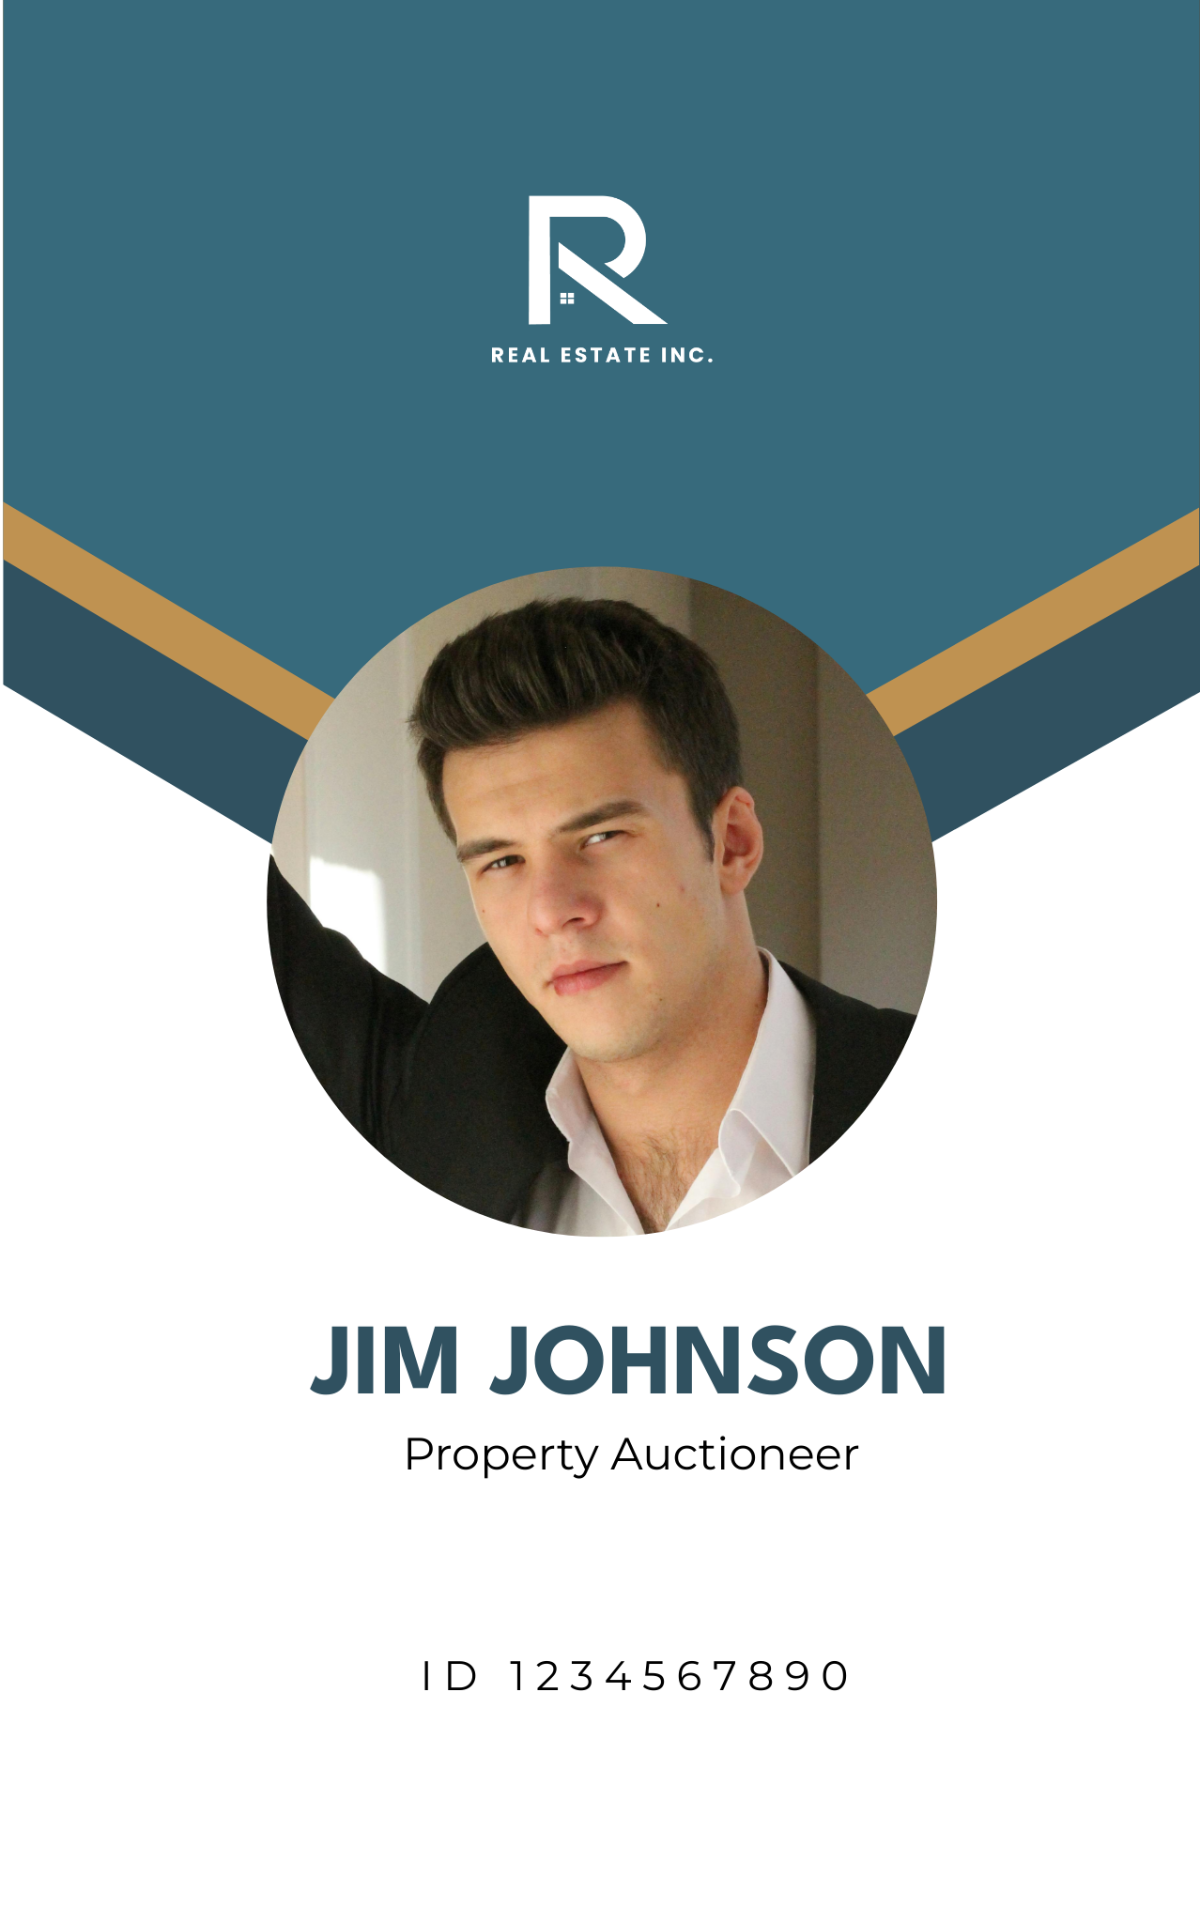 Free Property Auctioneer ID Card Template